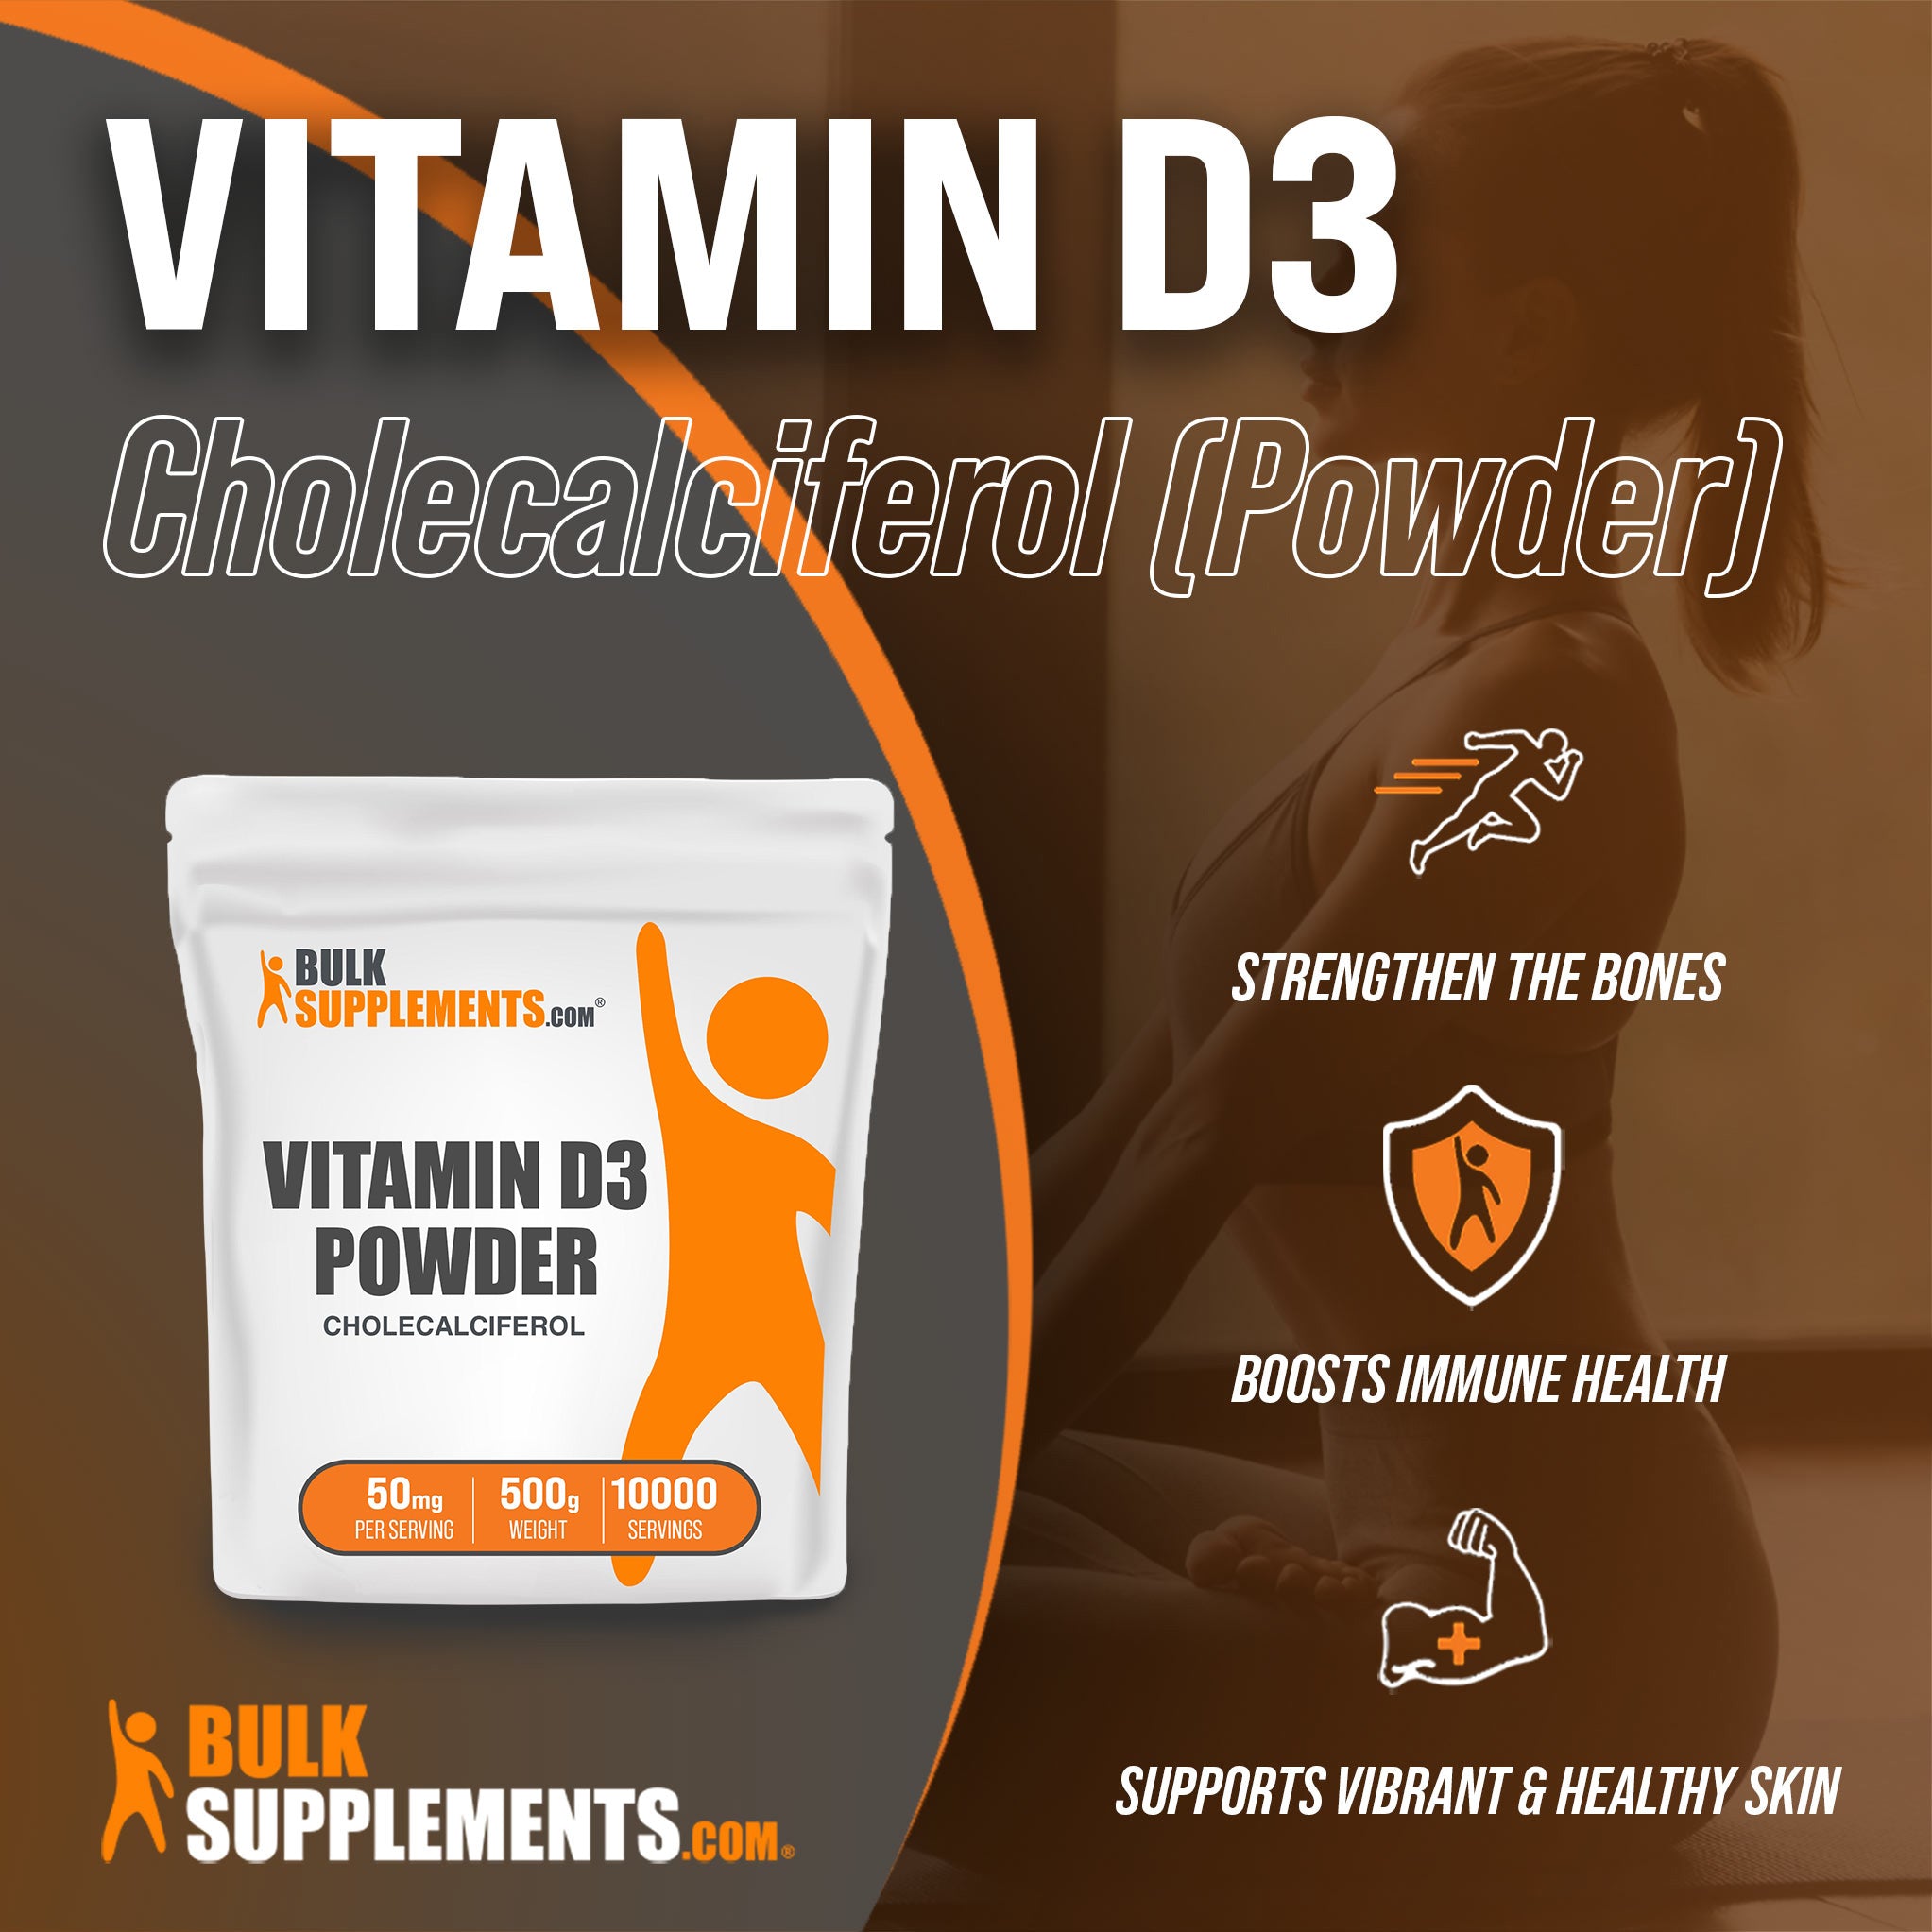 Benefits of Vitamin D3: strengthen the bones, boosts immune health, supports vibrant and healthy skin